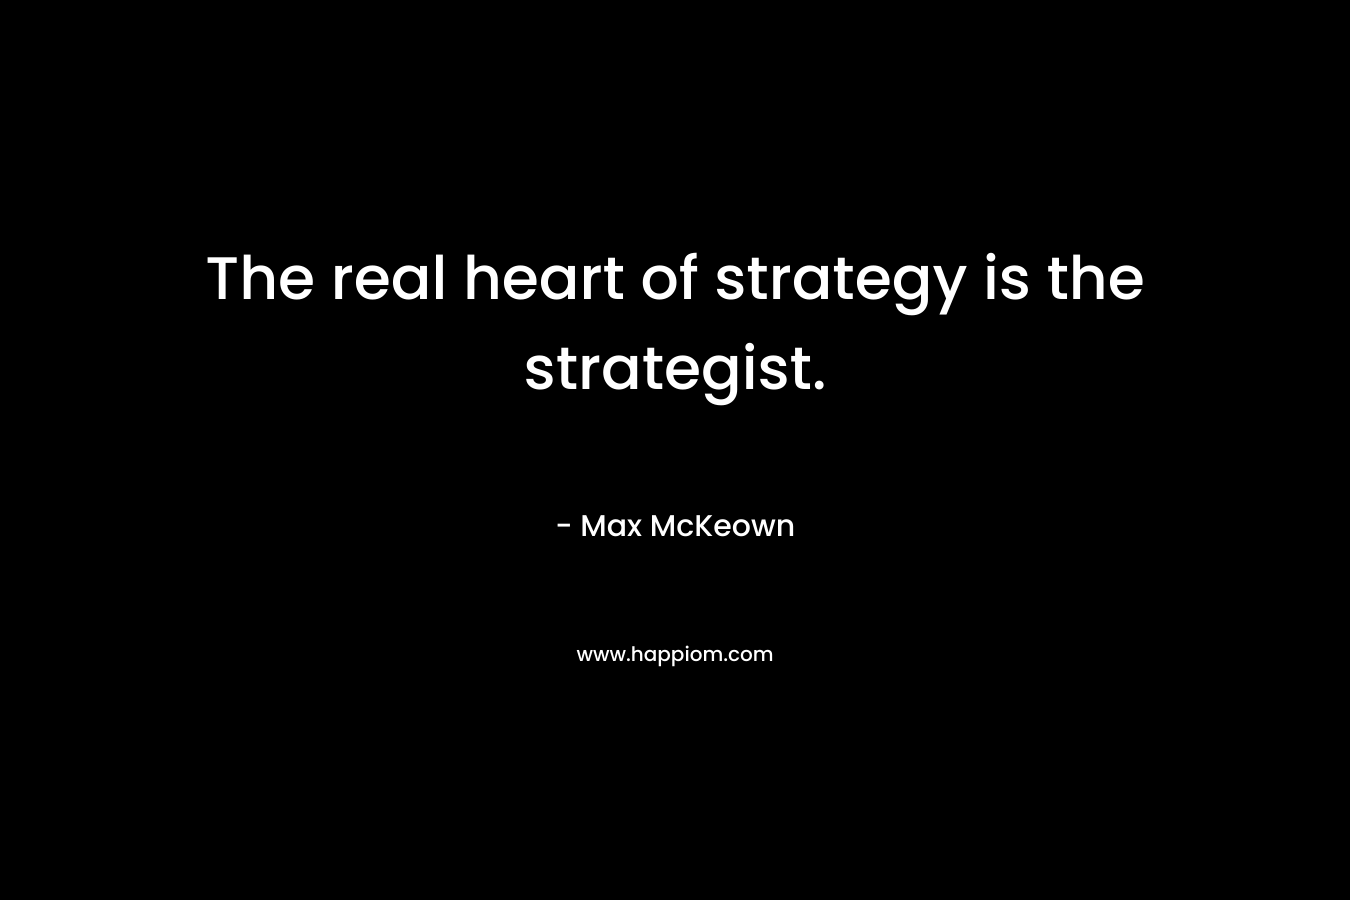 The real heart of strategy is the strategist. – Max McKeown